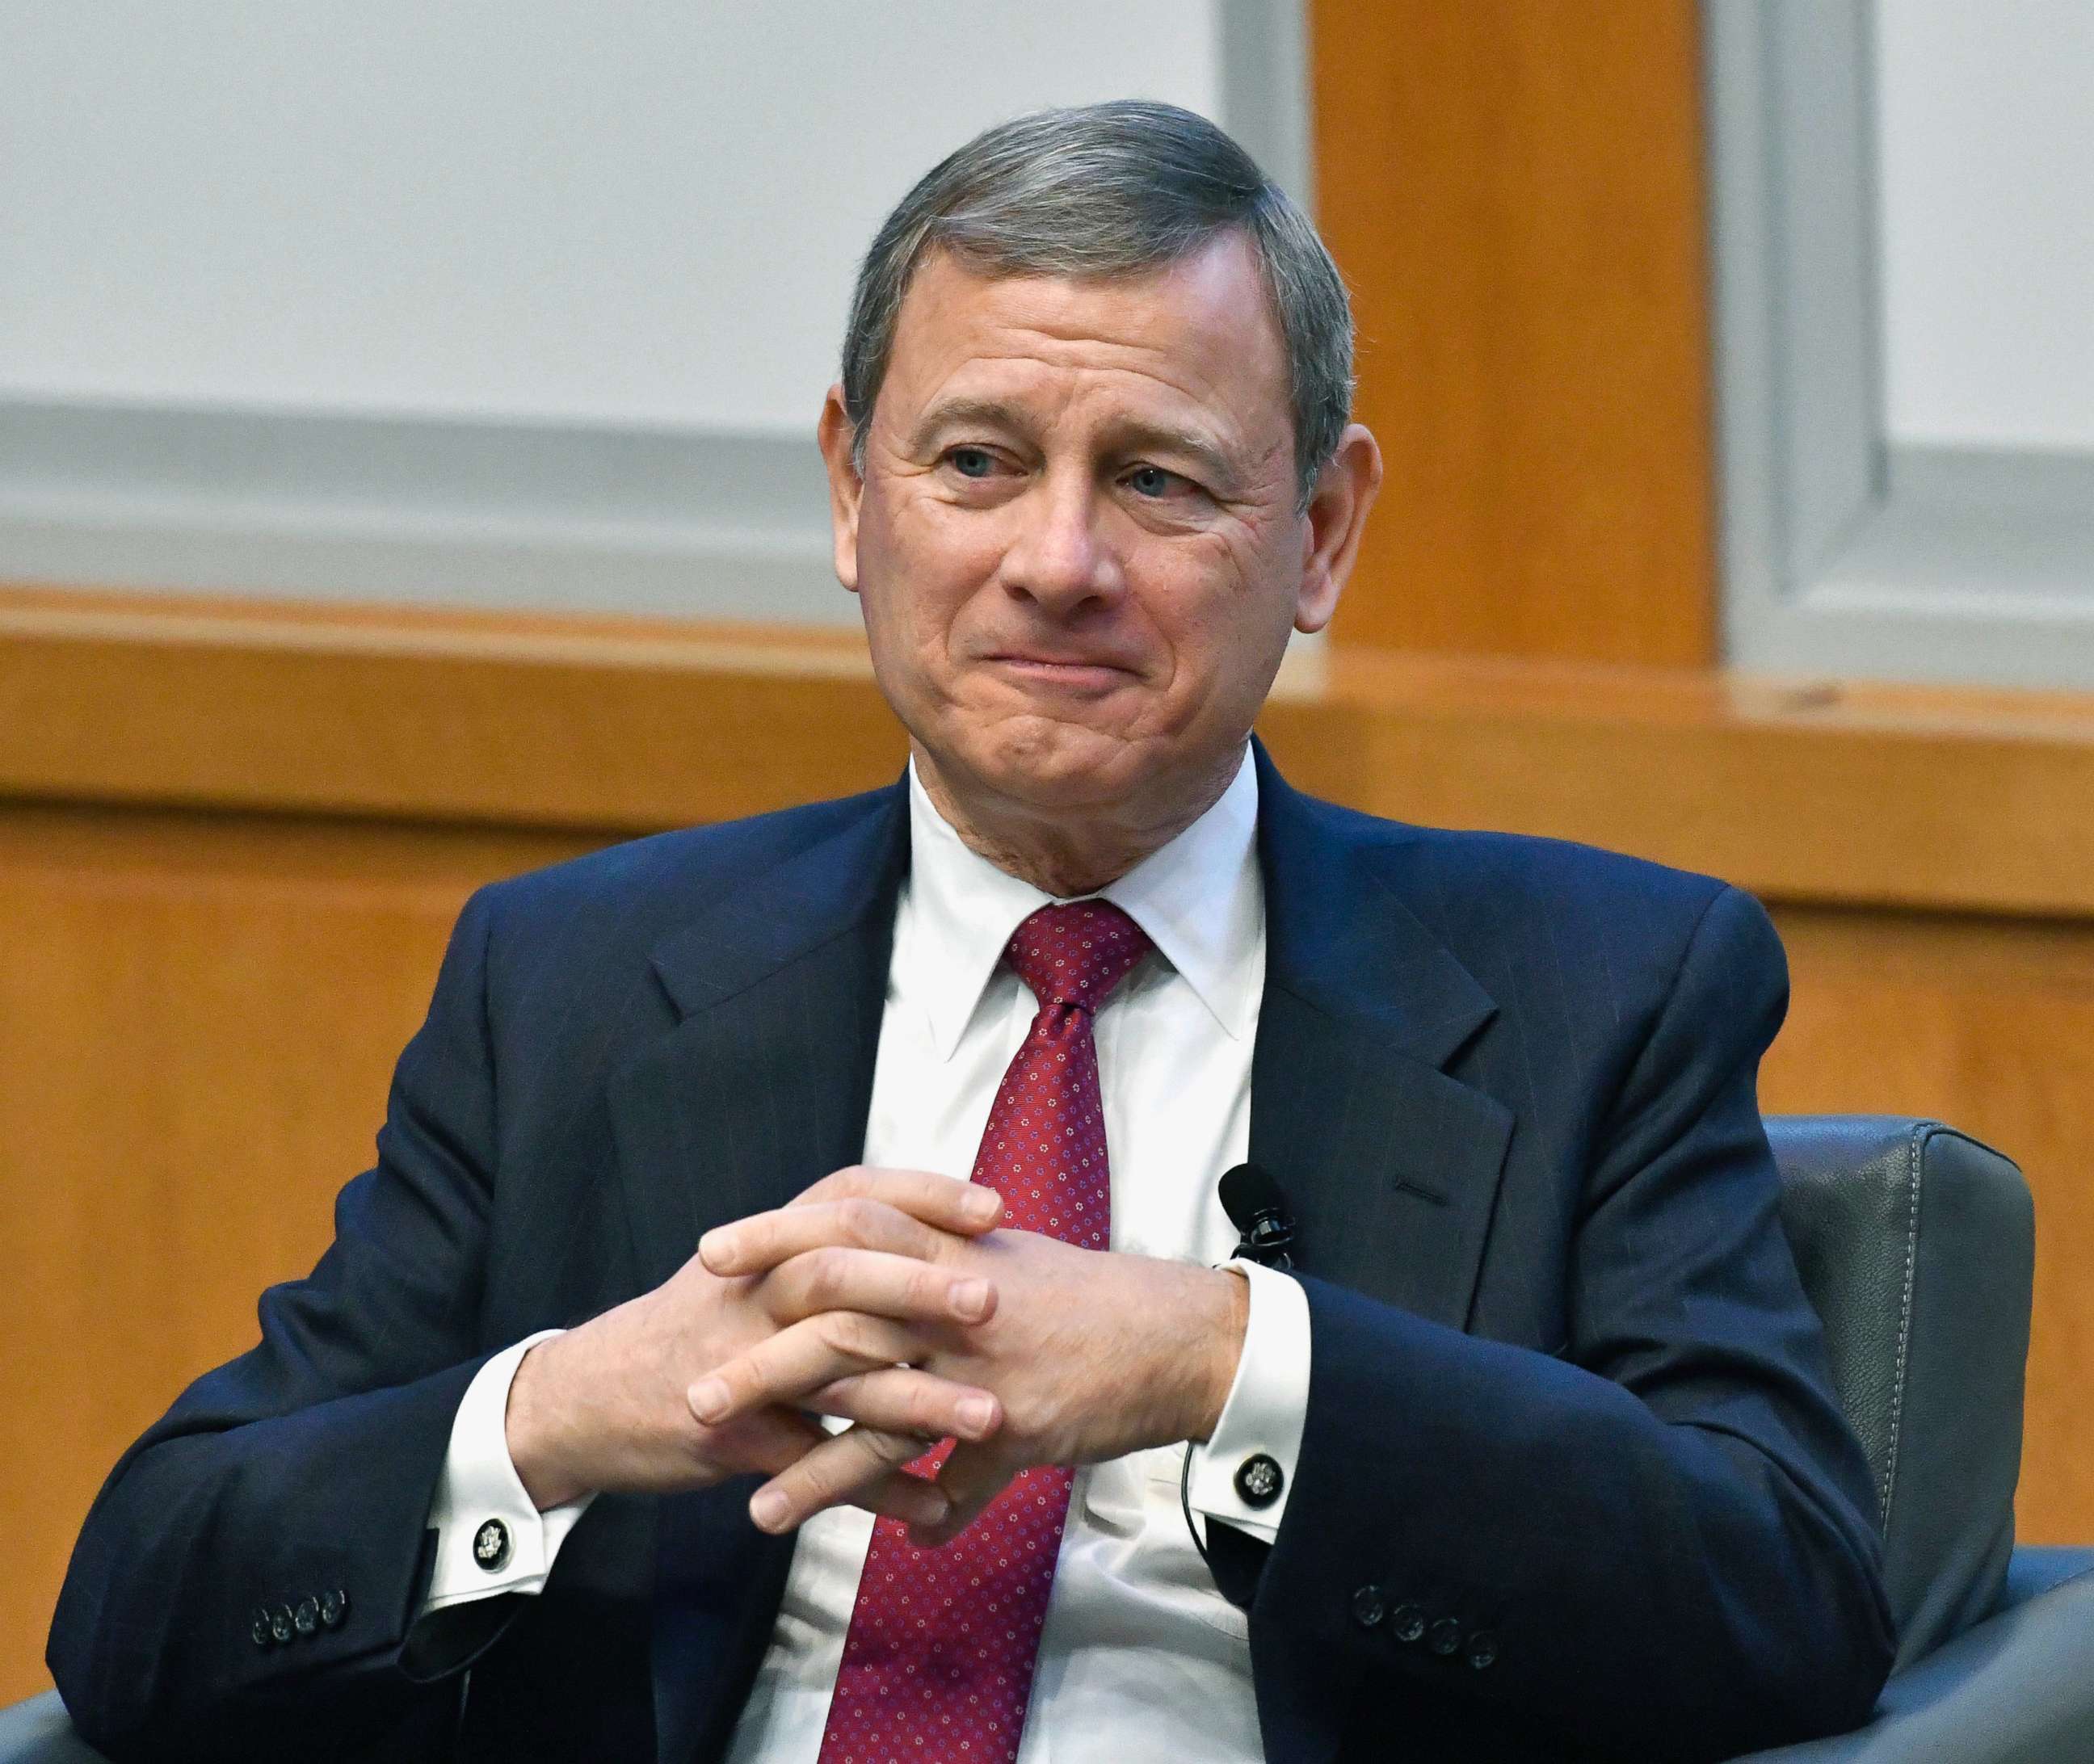 PHOTO: Supreme Court Chief Justice John Roberts prepares to speak at the The John G. Heyburn II Initiative and University of Kentucky College of Law's judicial conference and speaker series in Lexington, Kentucky, Feb. 1, 2017.